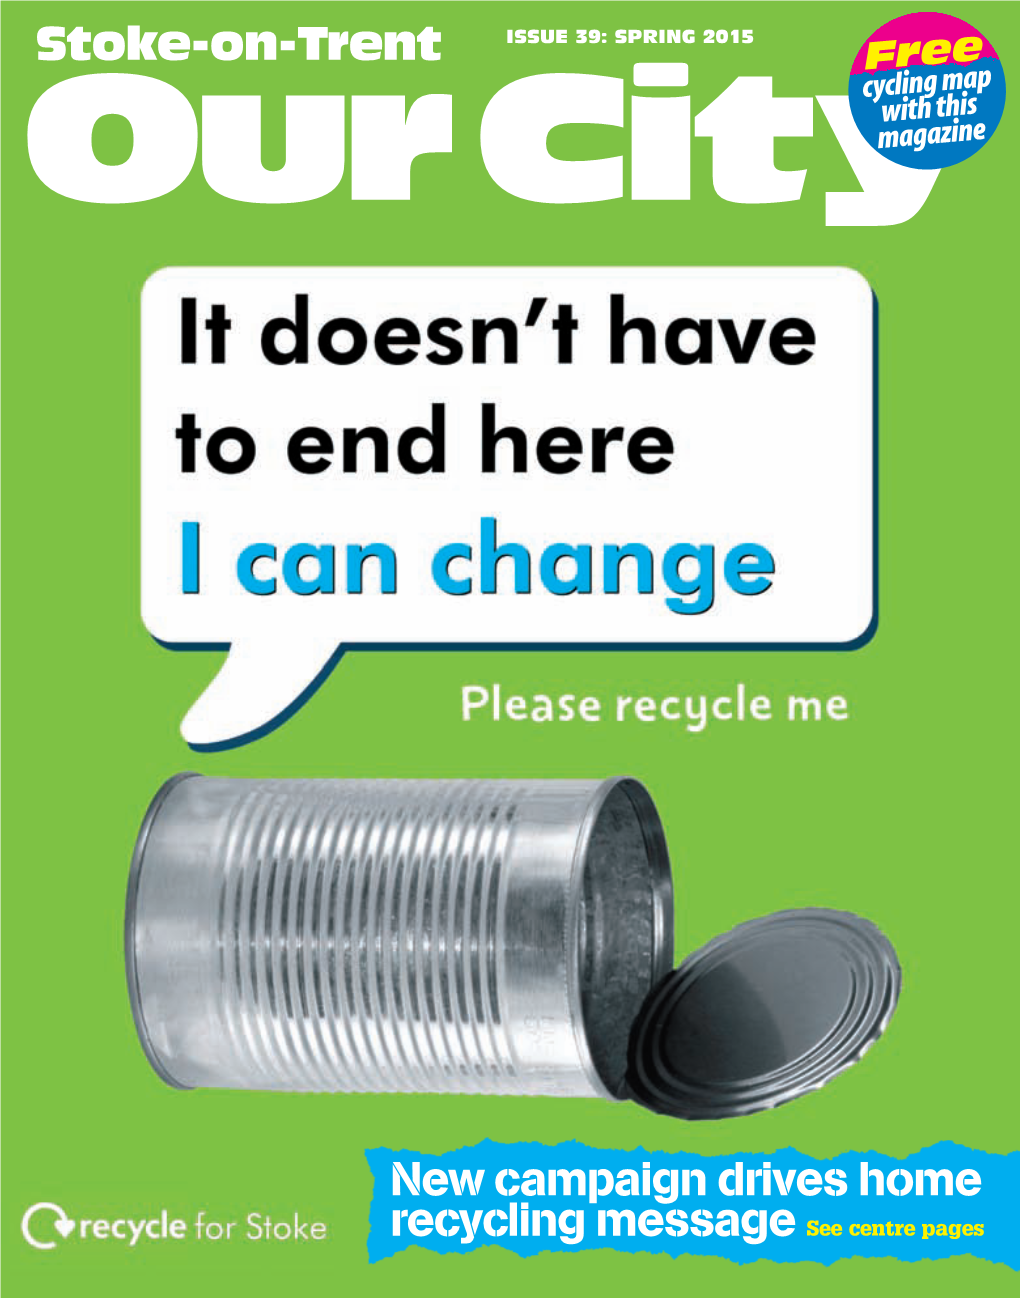 New Campaign Drives Home Recycling Message See Centre Pages Our City P2 11/2/15 09:53 Page 1